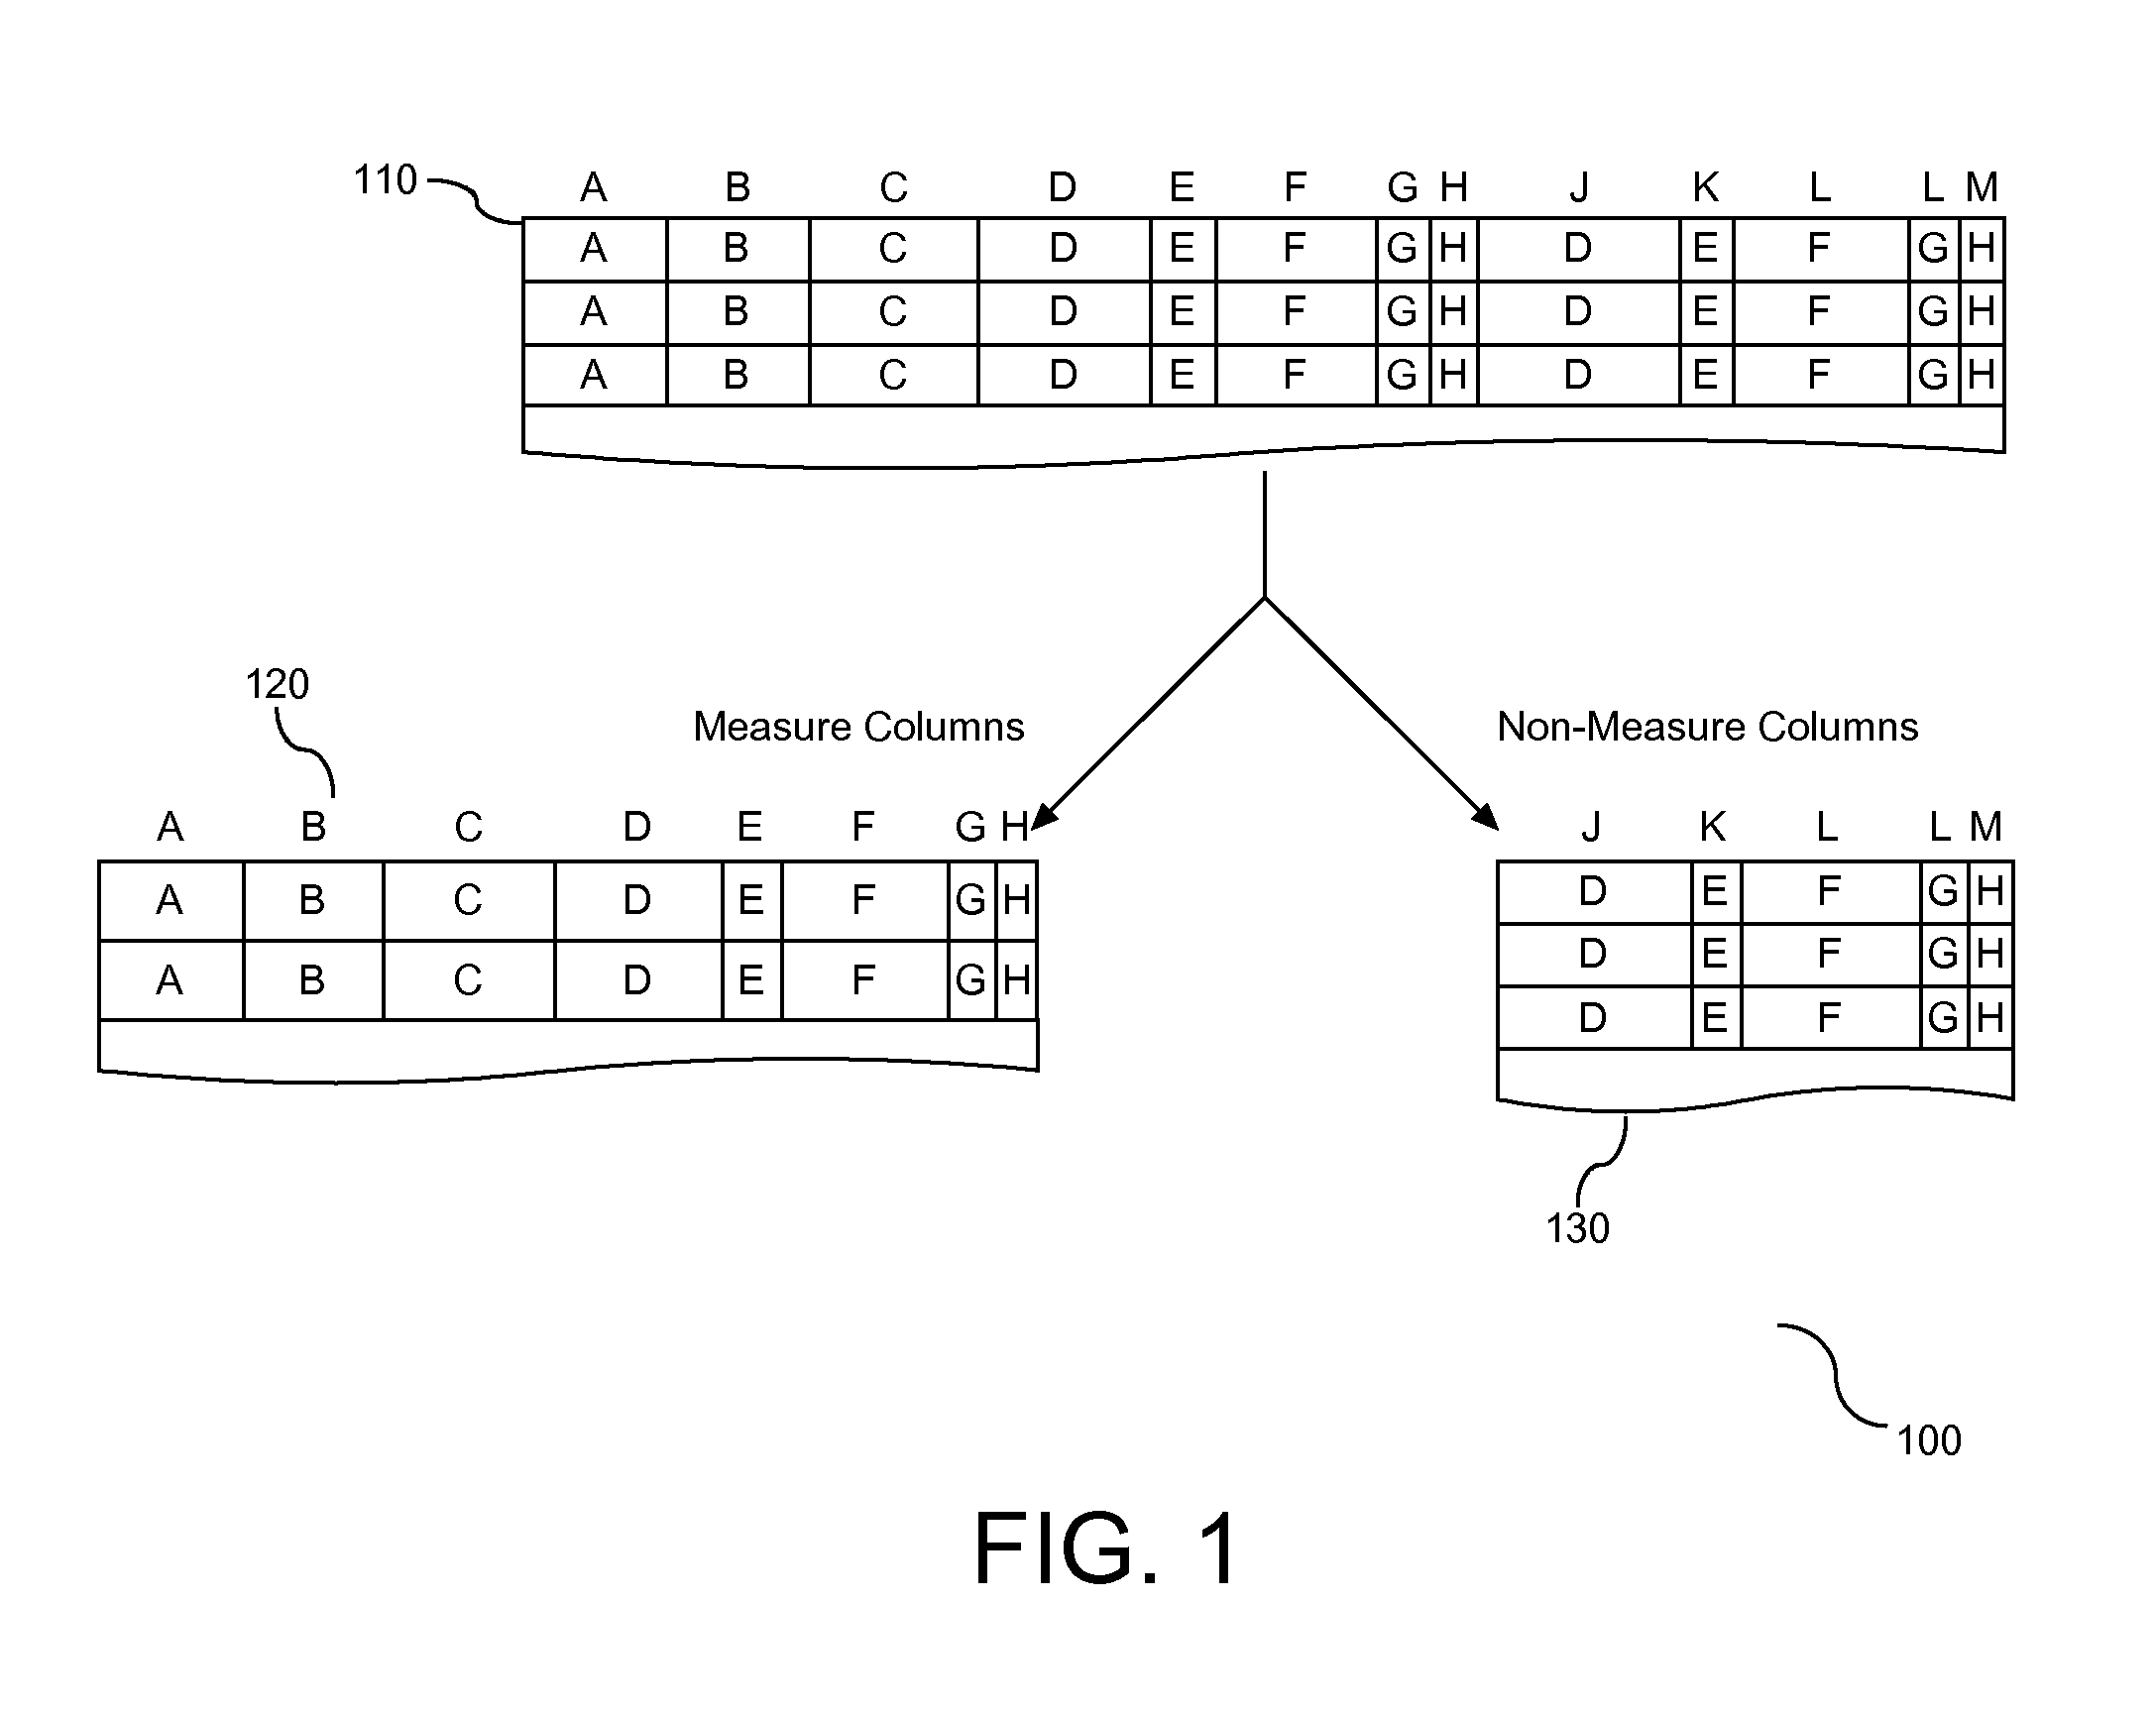 Method for Laying Out Fields in a Database in a Hybrid of Row-Wise and Column-Wise Ordering